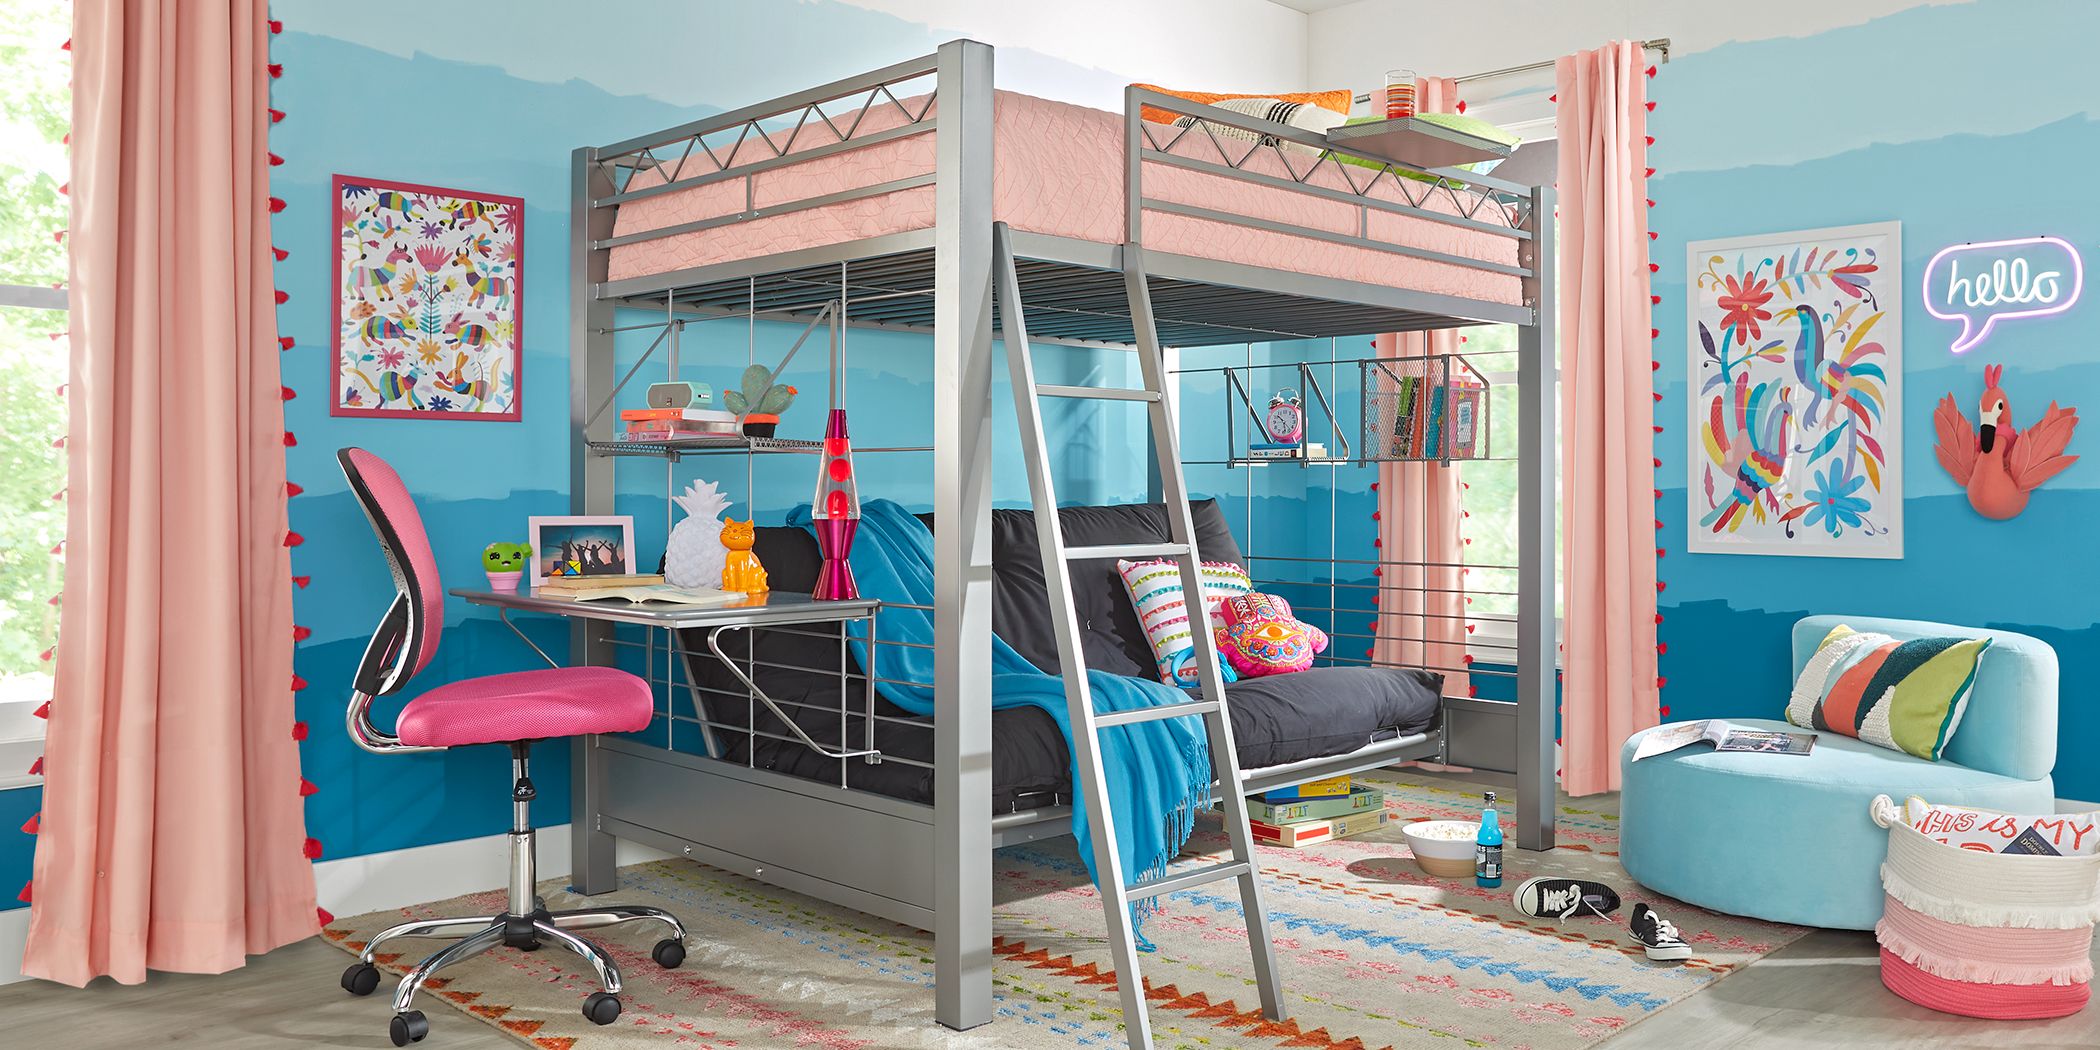 Rooms 2 Go Bunk Beds Carnawall Com, Bunk Beds For Kids Rooms To Go